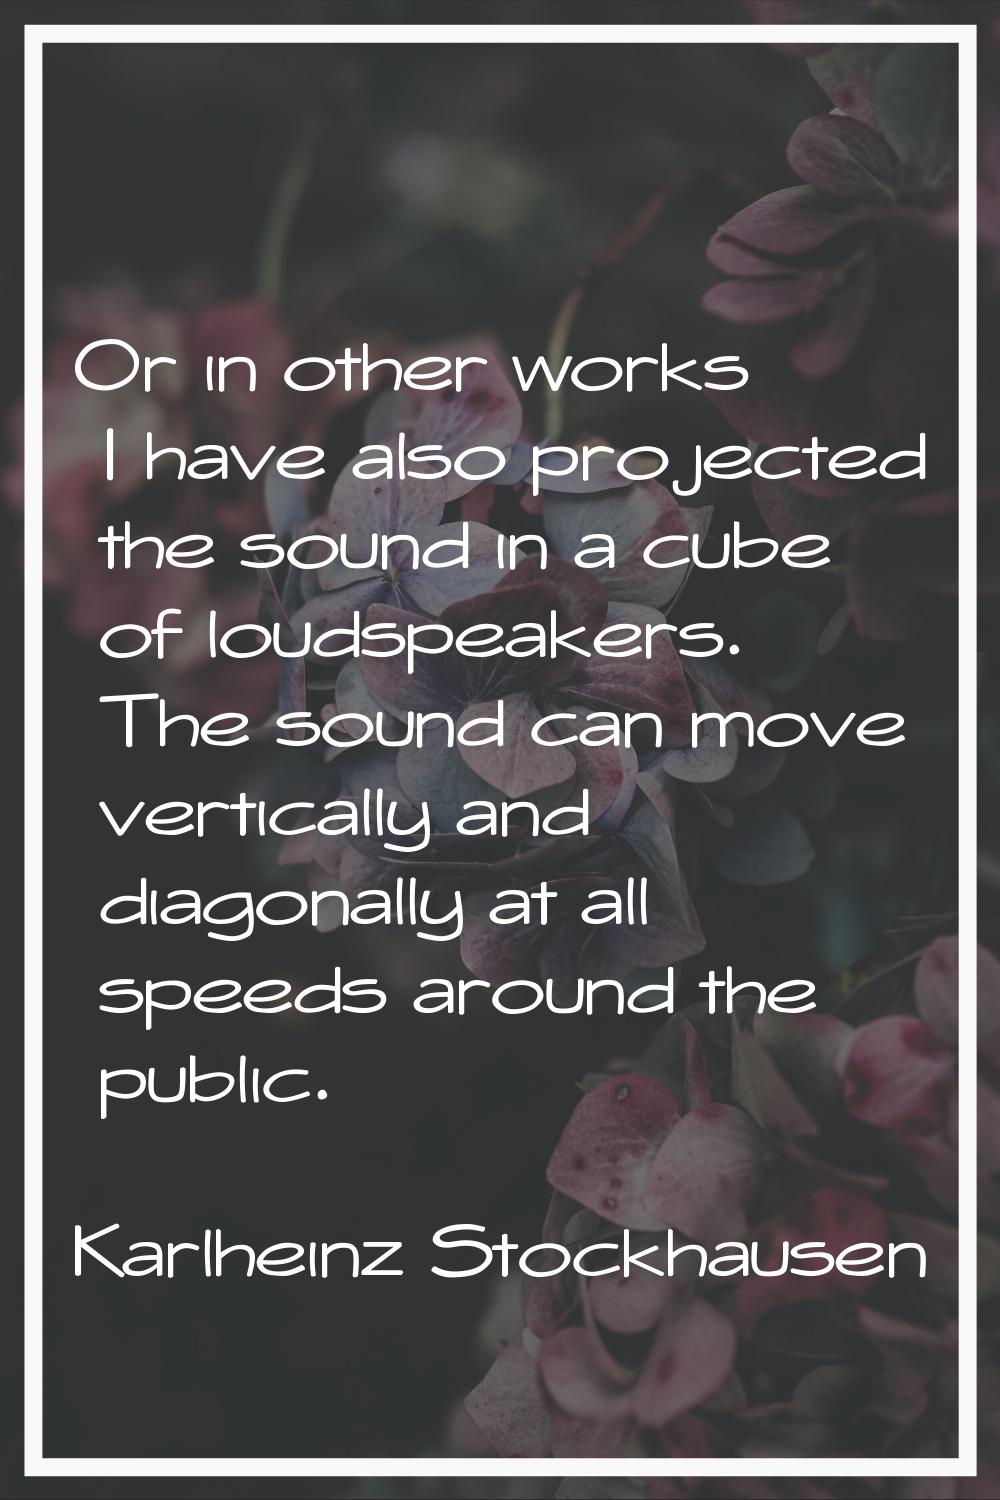 Or in other works I have also projected the sound in a cube of loudspeakers. The sound can move ver